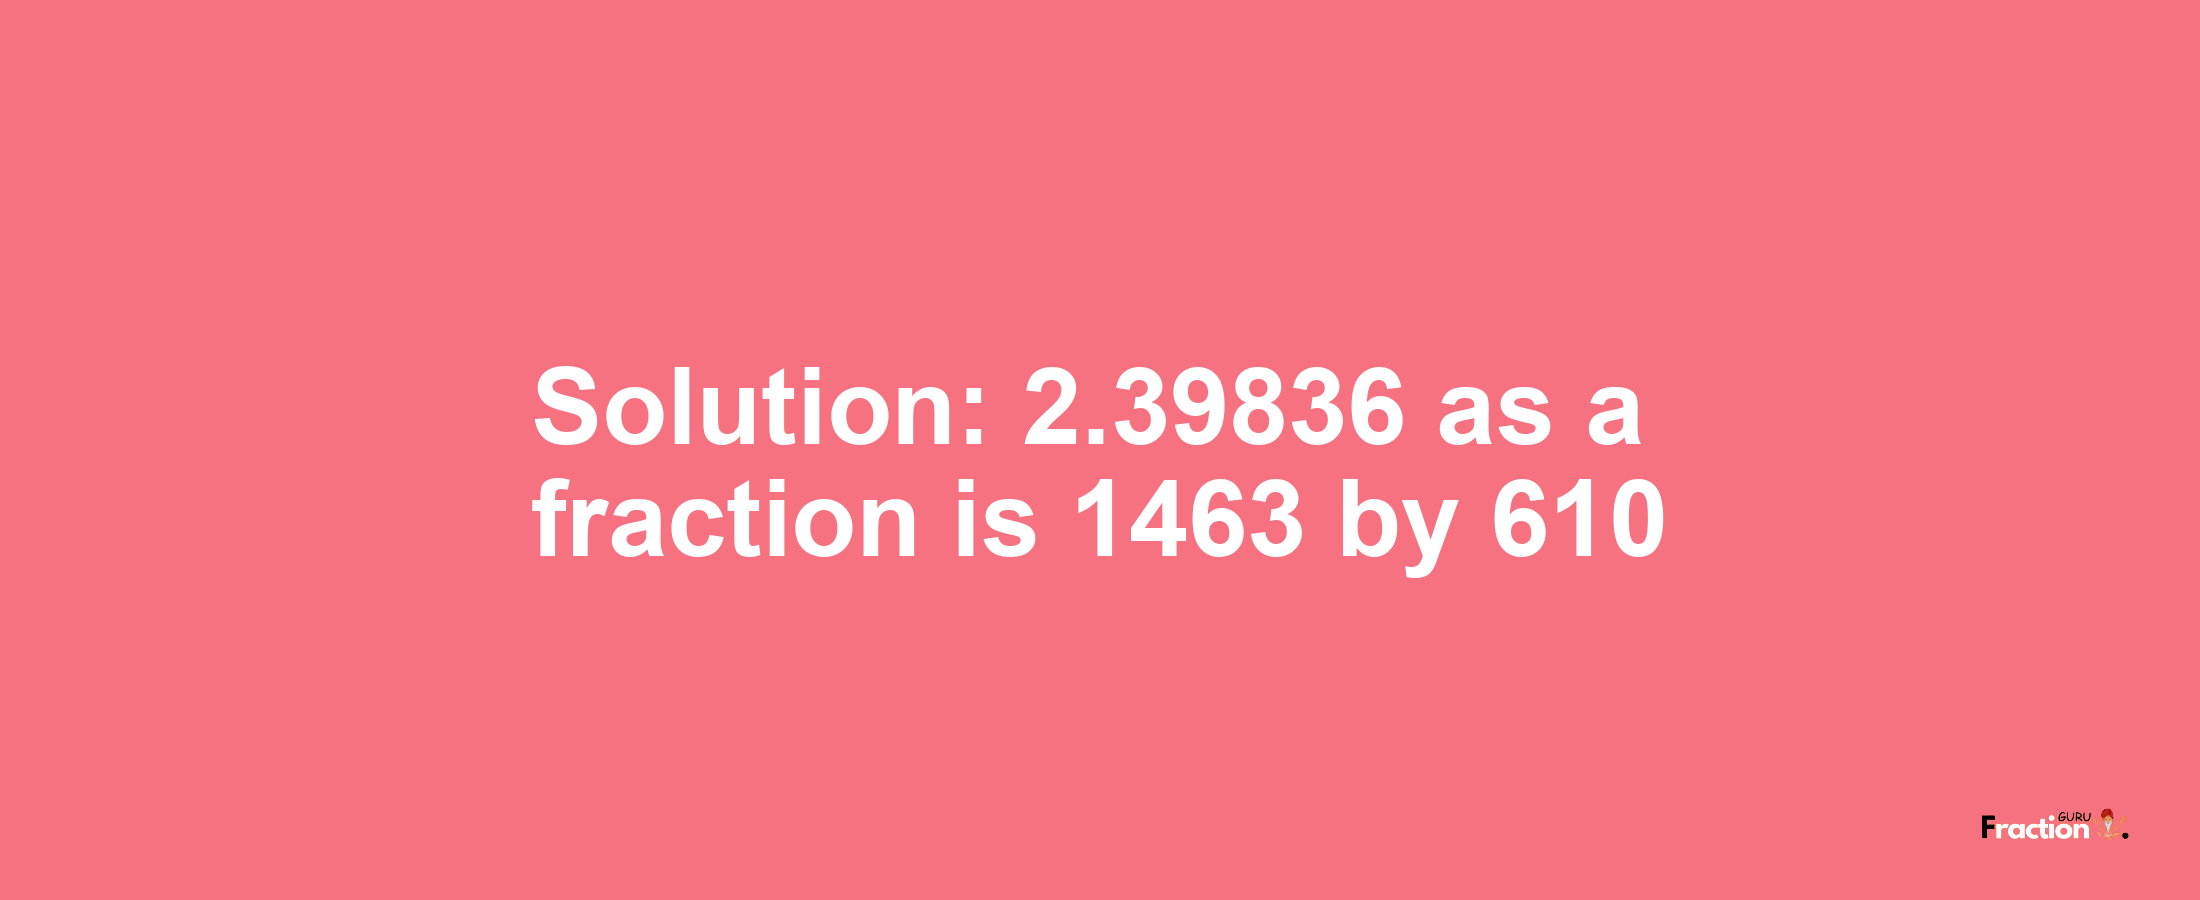 Solution:2.39836 as a fraction is 1463/610